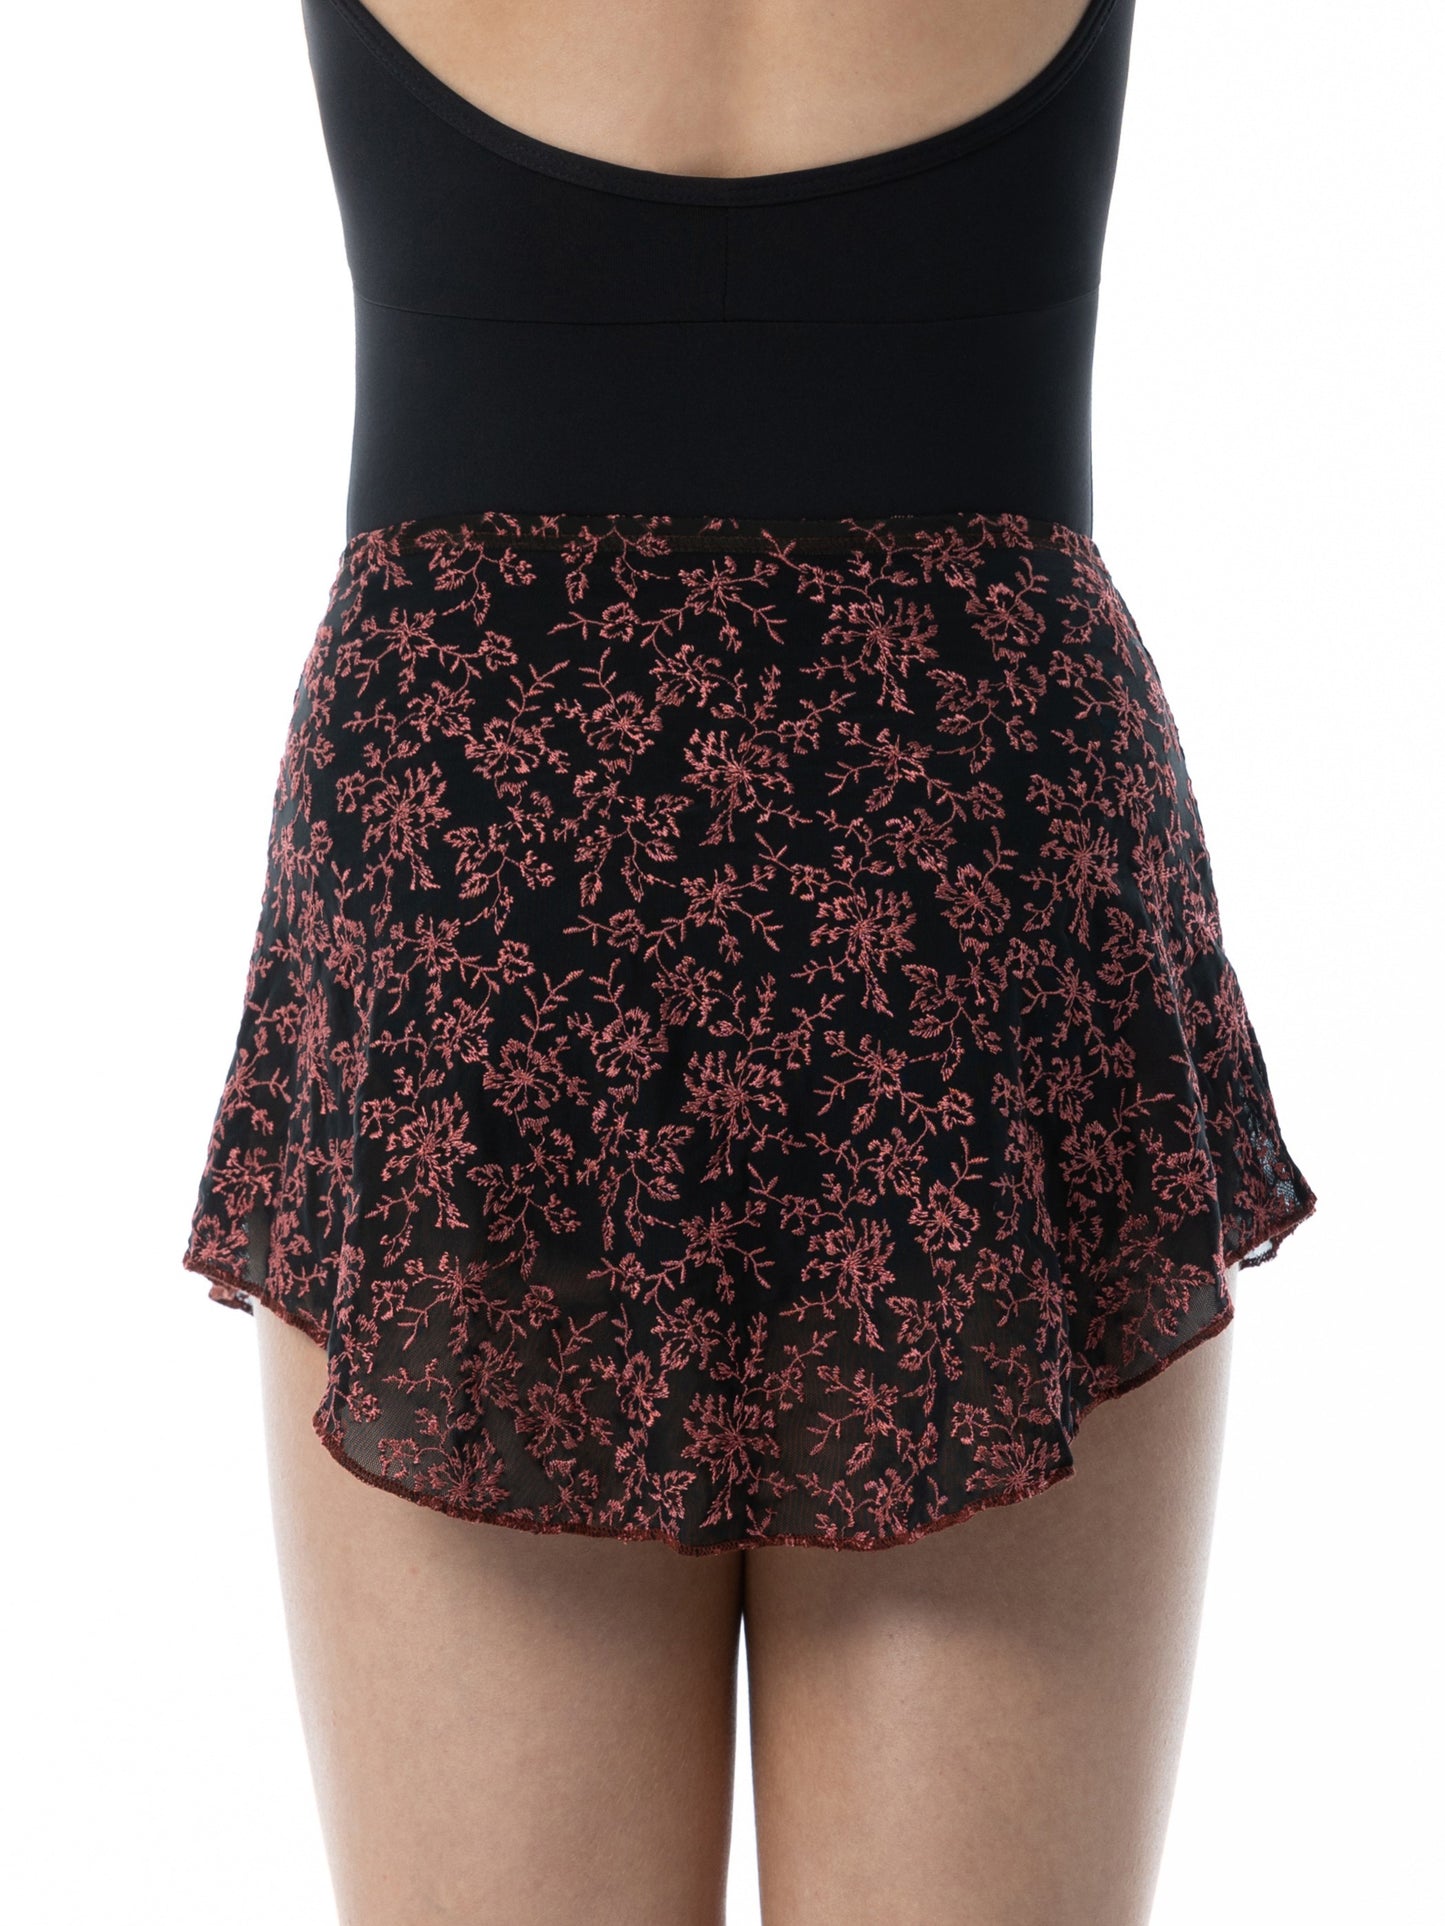 Darling Pull-on Embroidered Skirt - 1009A